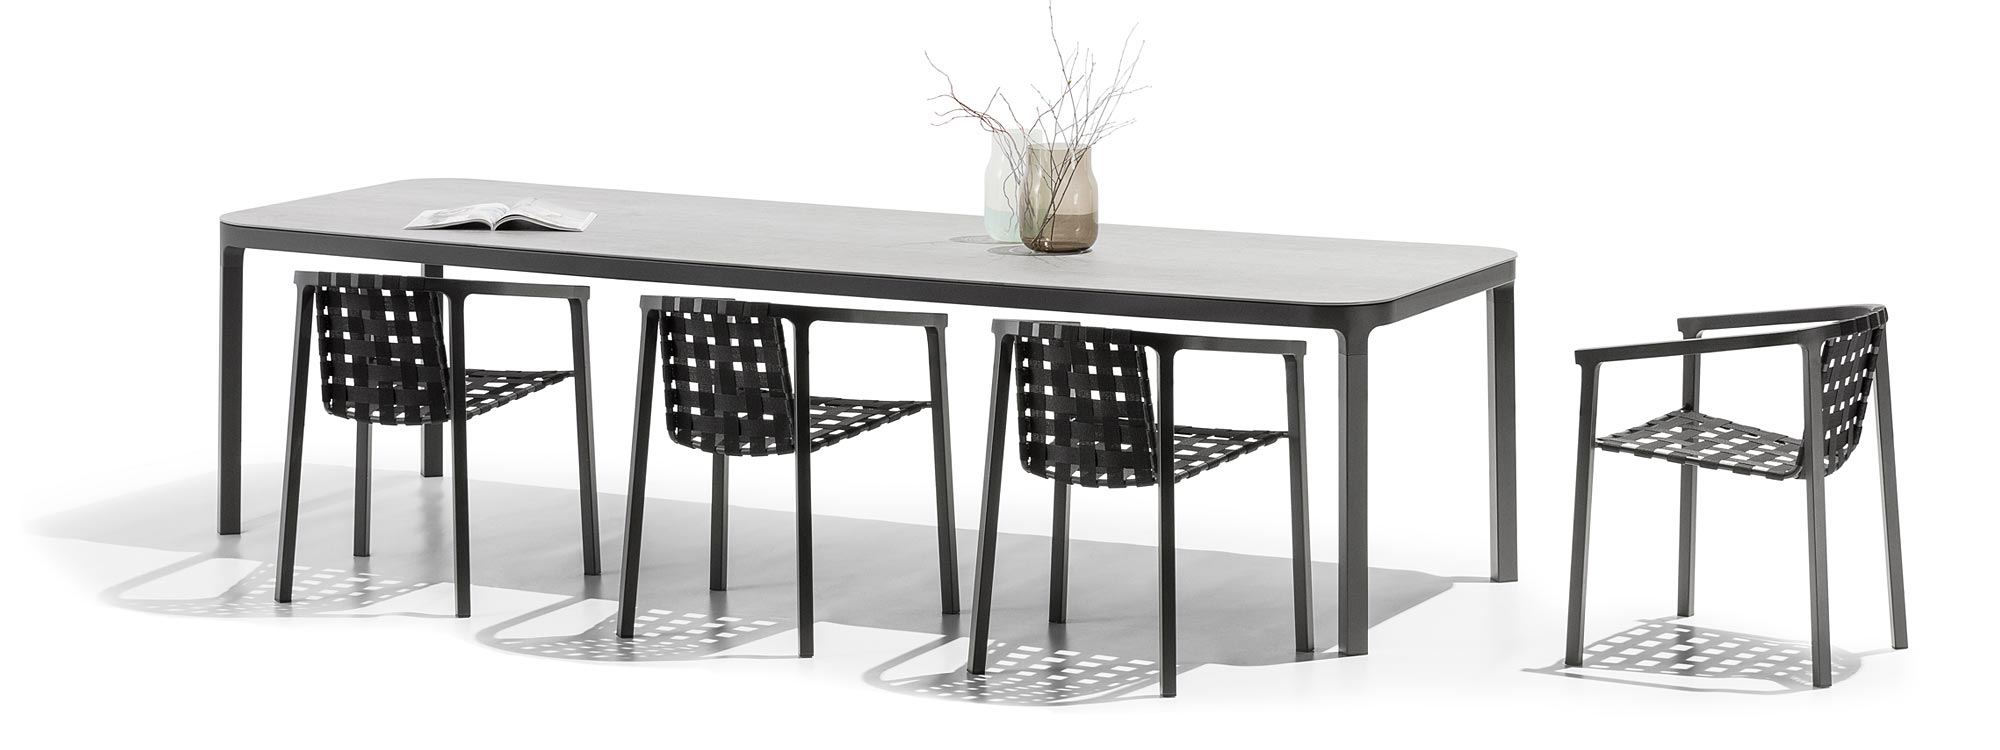 Duct garden dining table and chair have designed by Studio Segers and are hand-made in Czech Republic by Todus